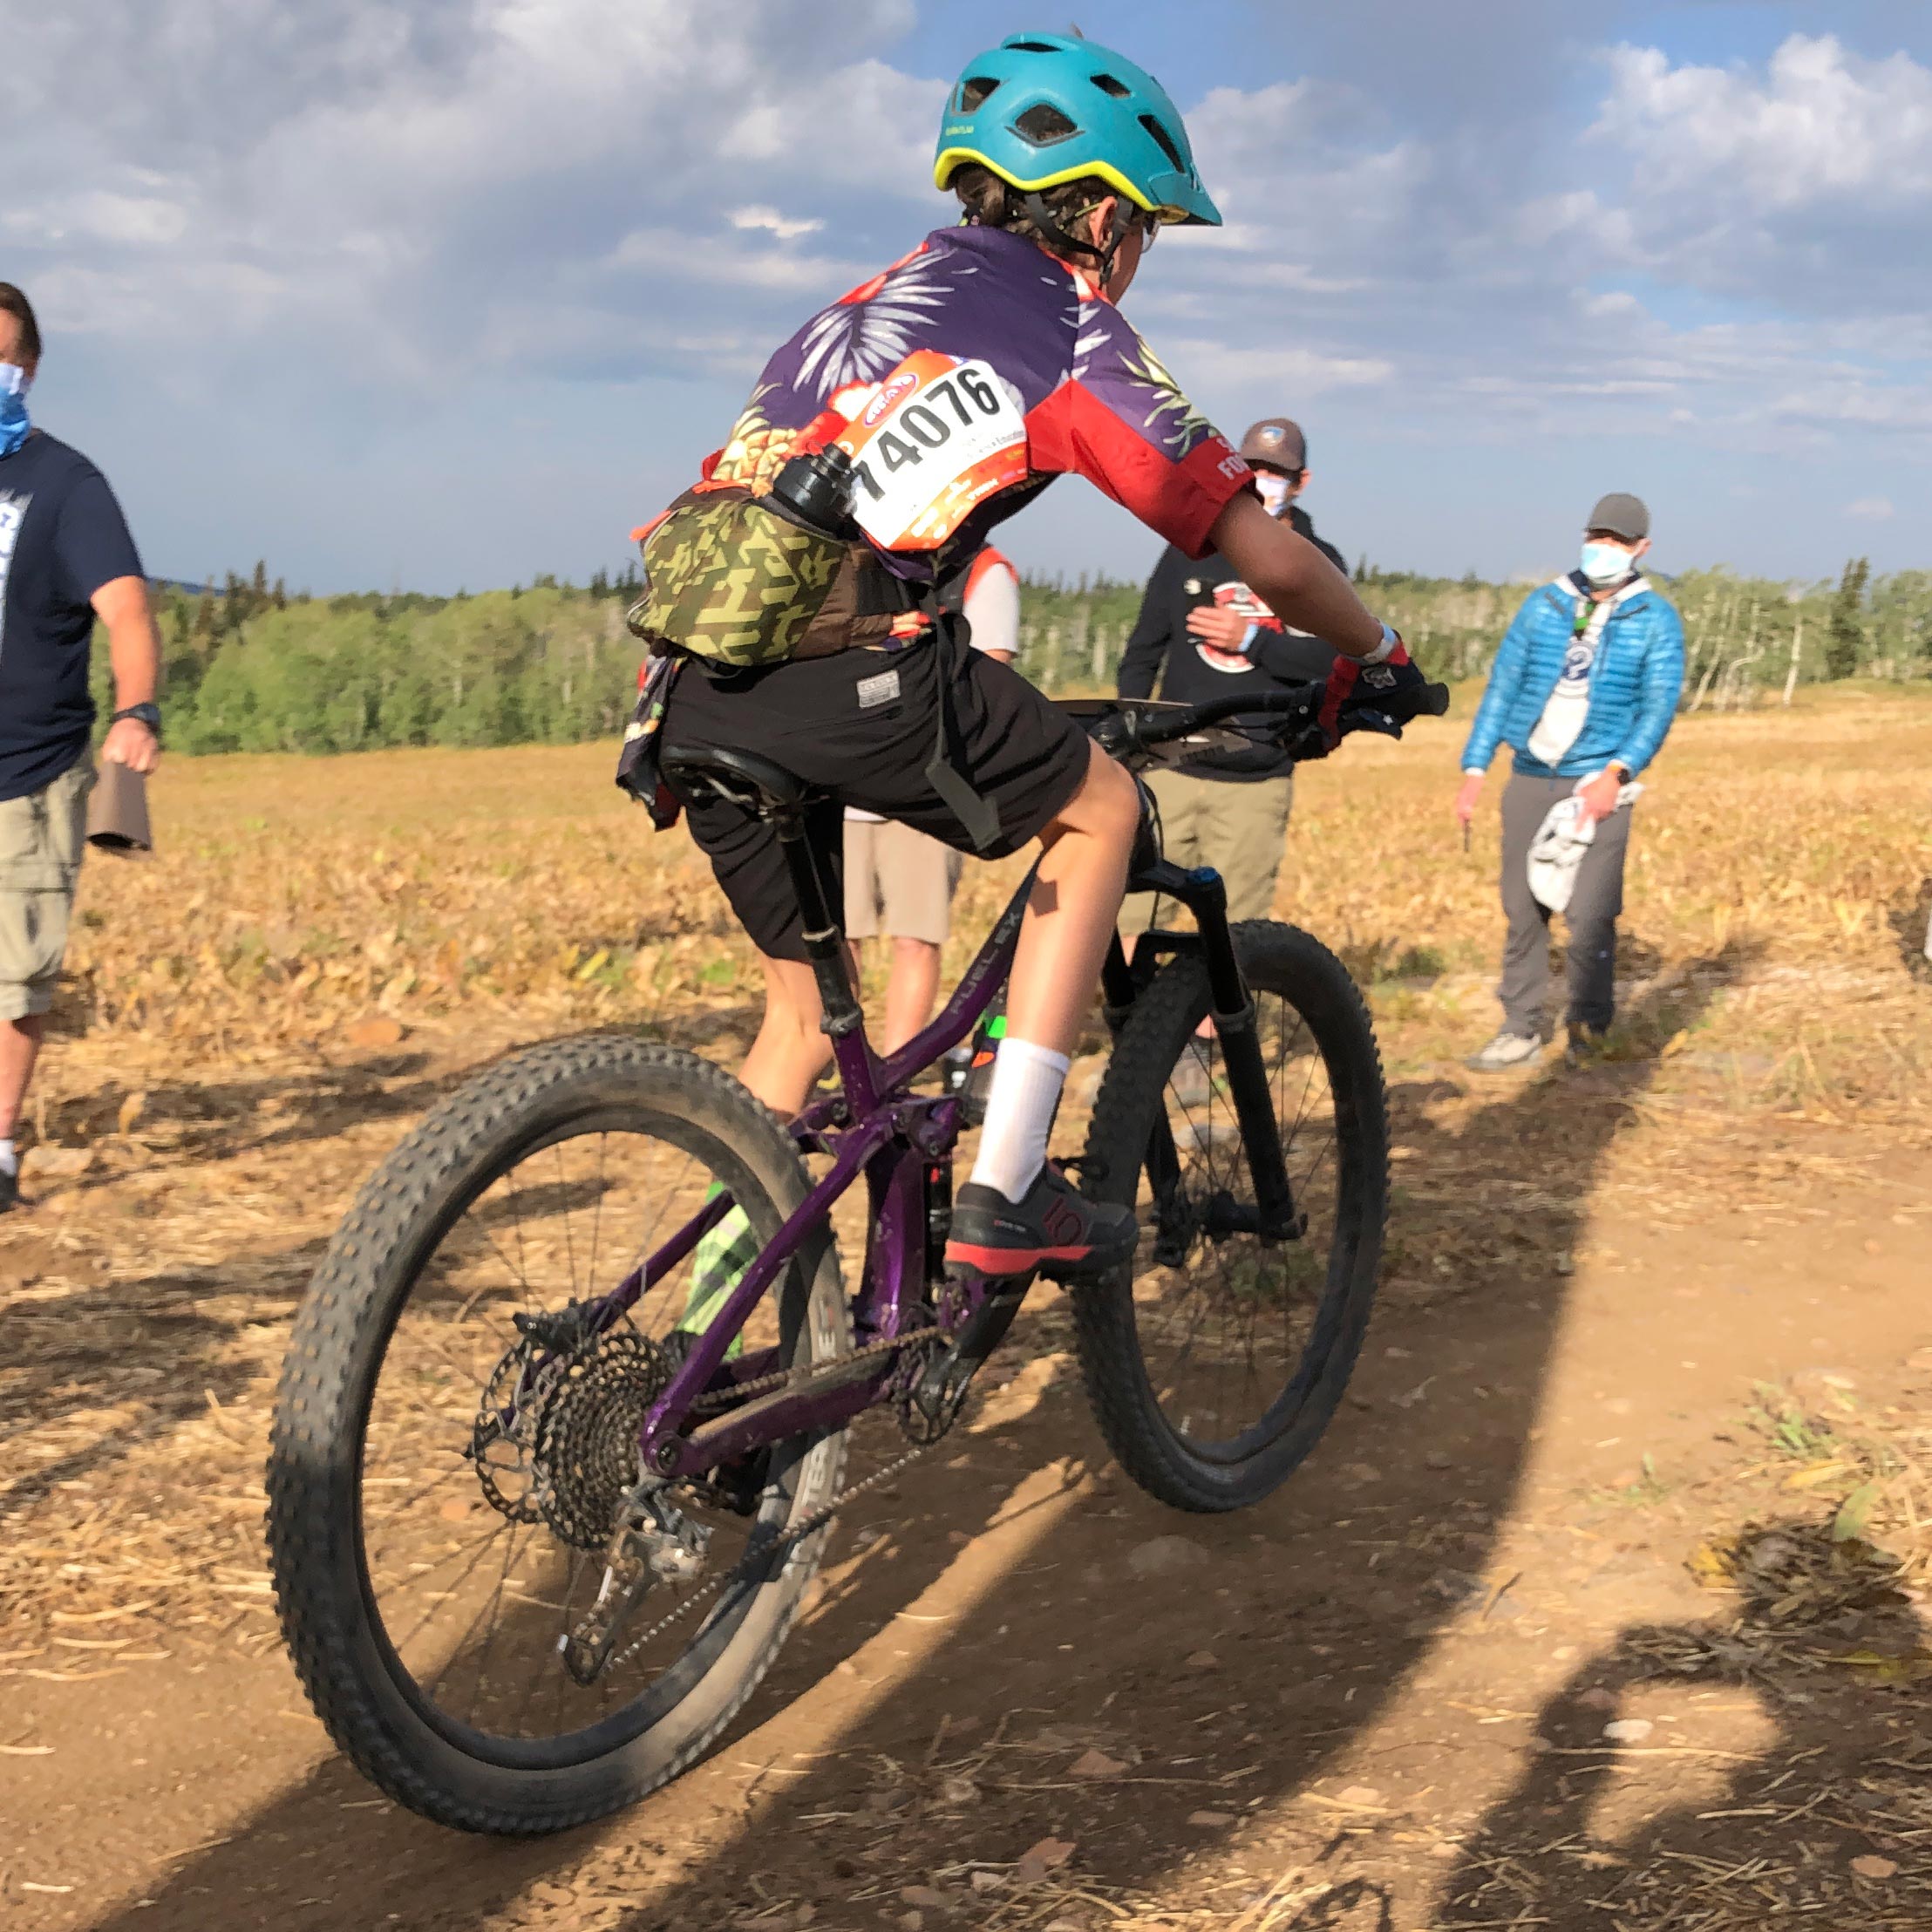 Racing with the Camelbak Flow/Podium hip pack